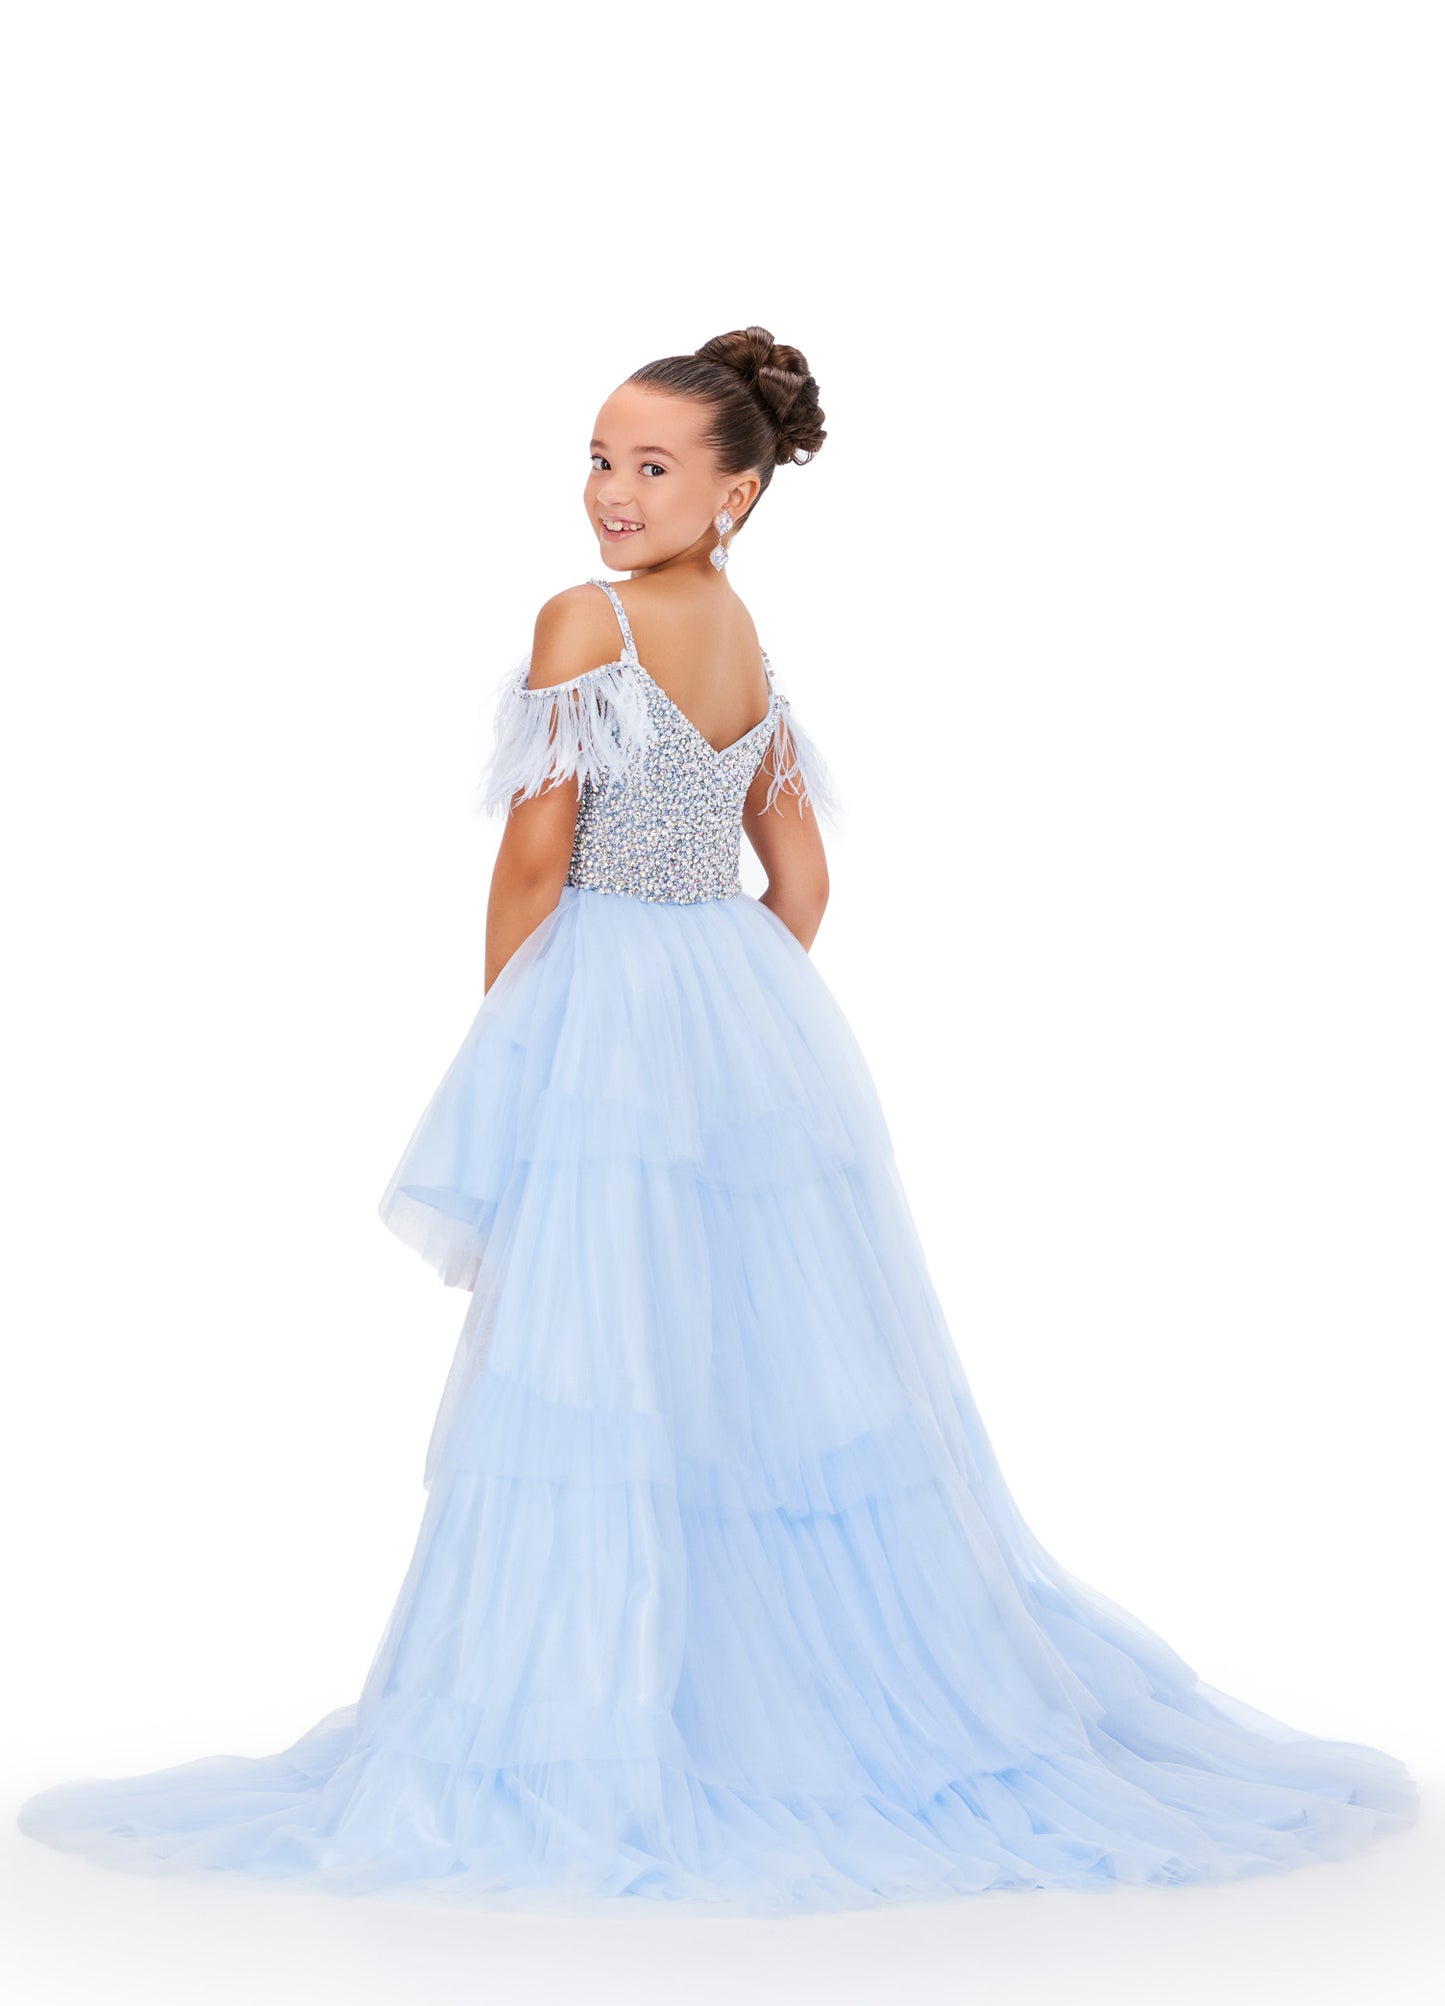 This Ashley Lauren Kids 8259 dress features layered tulle, a high low style, and an off the shoulder design with delicate feather accents. Perfect for pageants, your little girl will look stunning and feel confident in this unique and elegant dress. This fun & flirty kids tulle tiered high low features off the shoulder feather straps and a crystal encrusted bodice